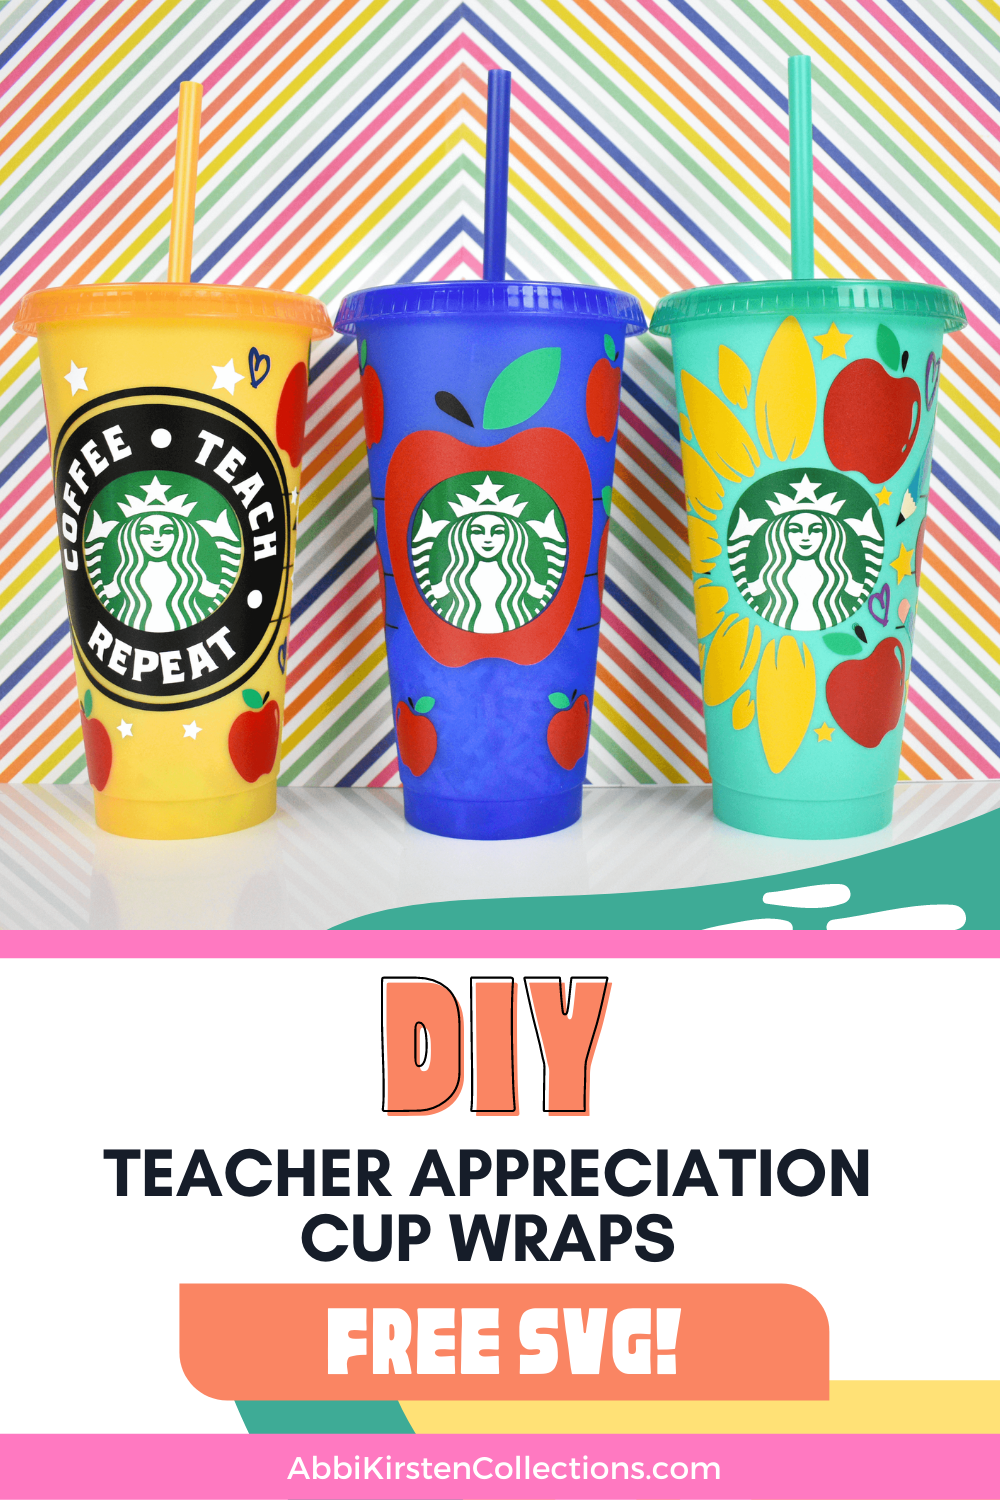 Three colorful plastic reusable Starbucks cups decorated with colorful vinyl stickers. The cups are decorated with apples, flowers, and words to express teacher appreciation. 